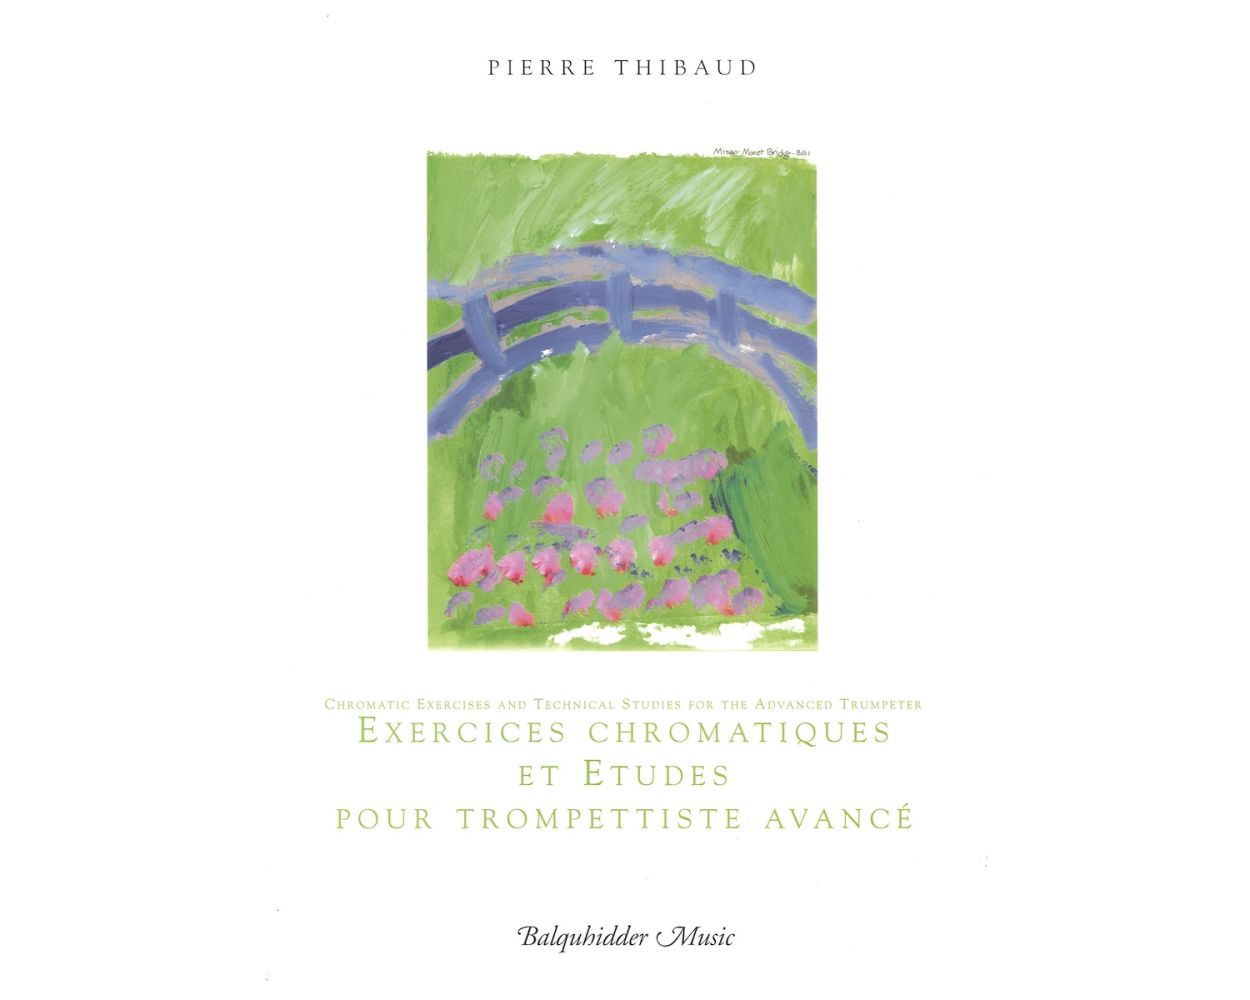 Thibaud - Chromatic Exercises and Technical Studies for the Advanced Trumpeter